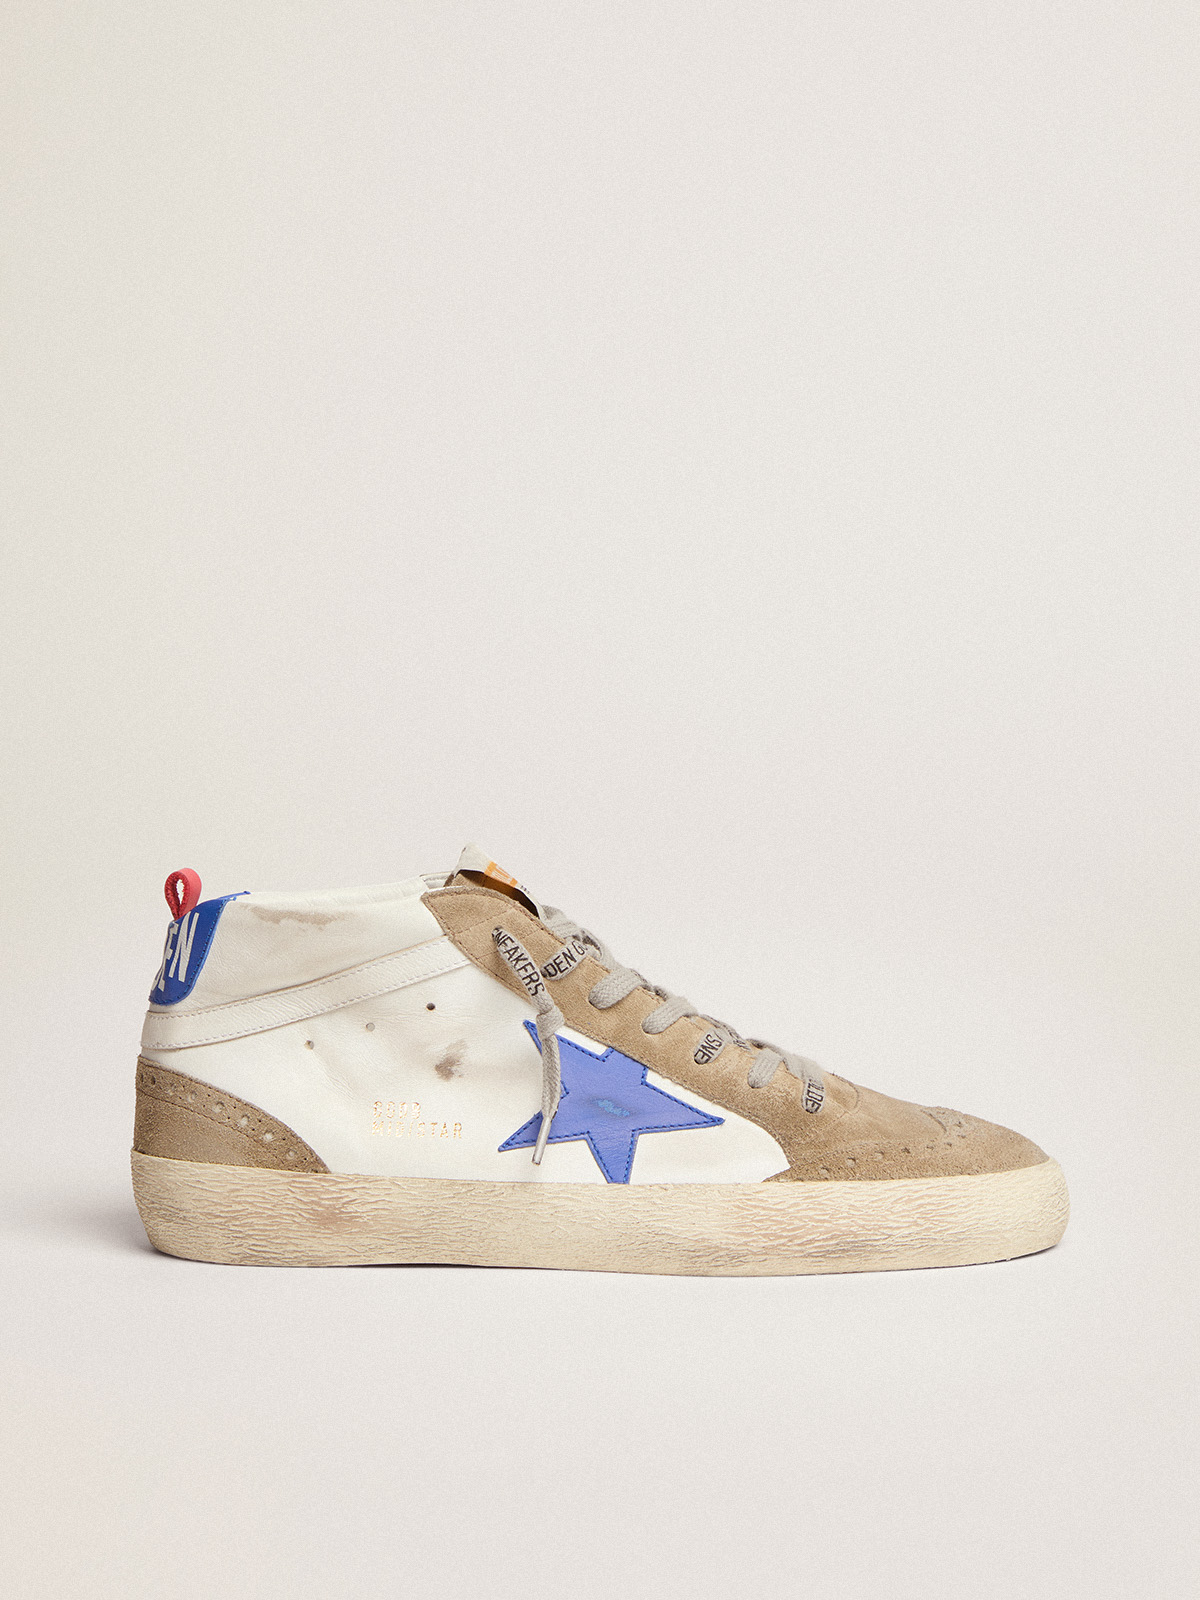 Men\'s Mid Star in white leather with blue star and dove gray inserts |  Golden Goose